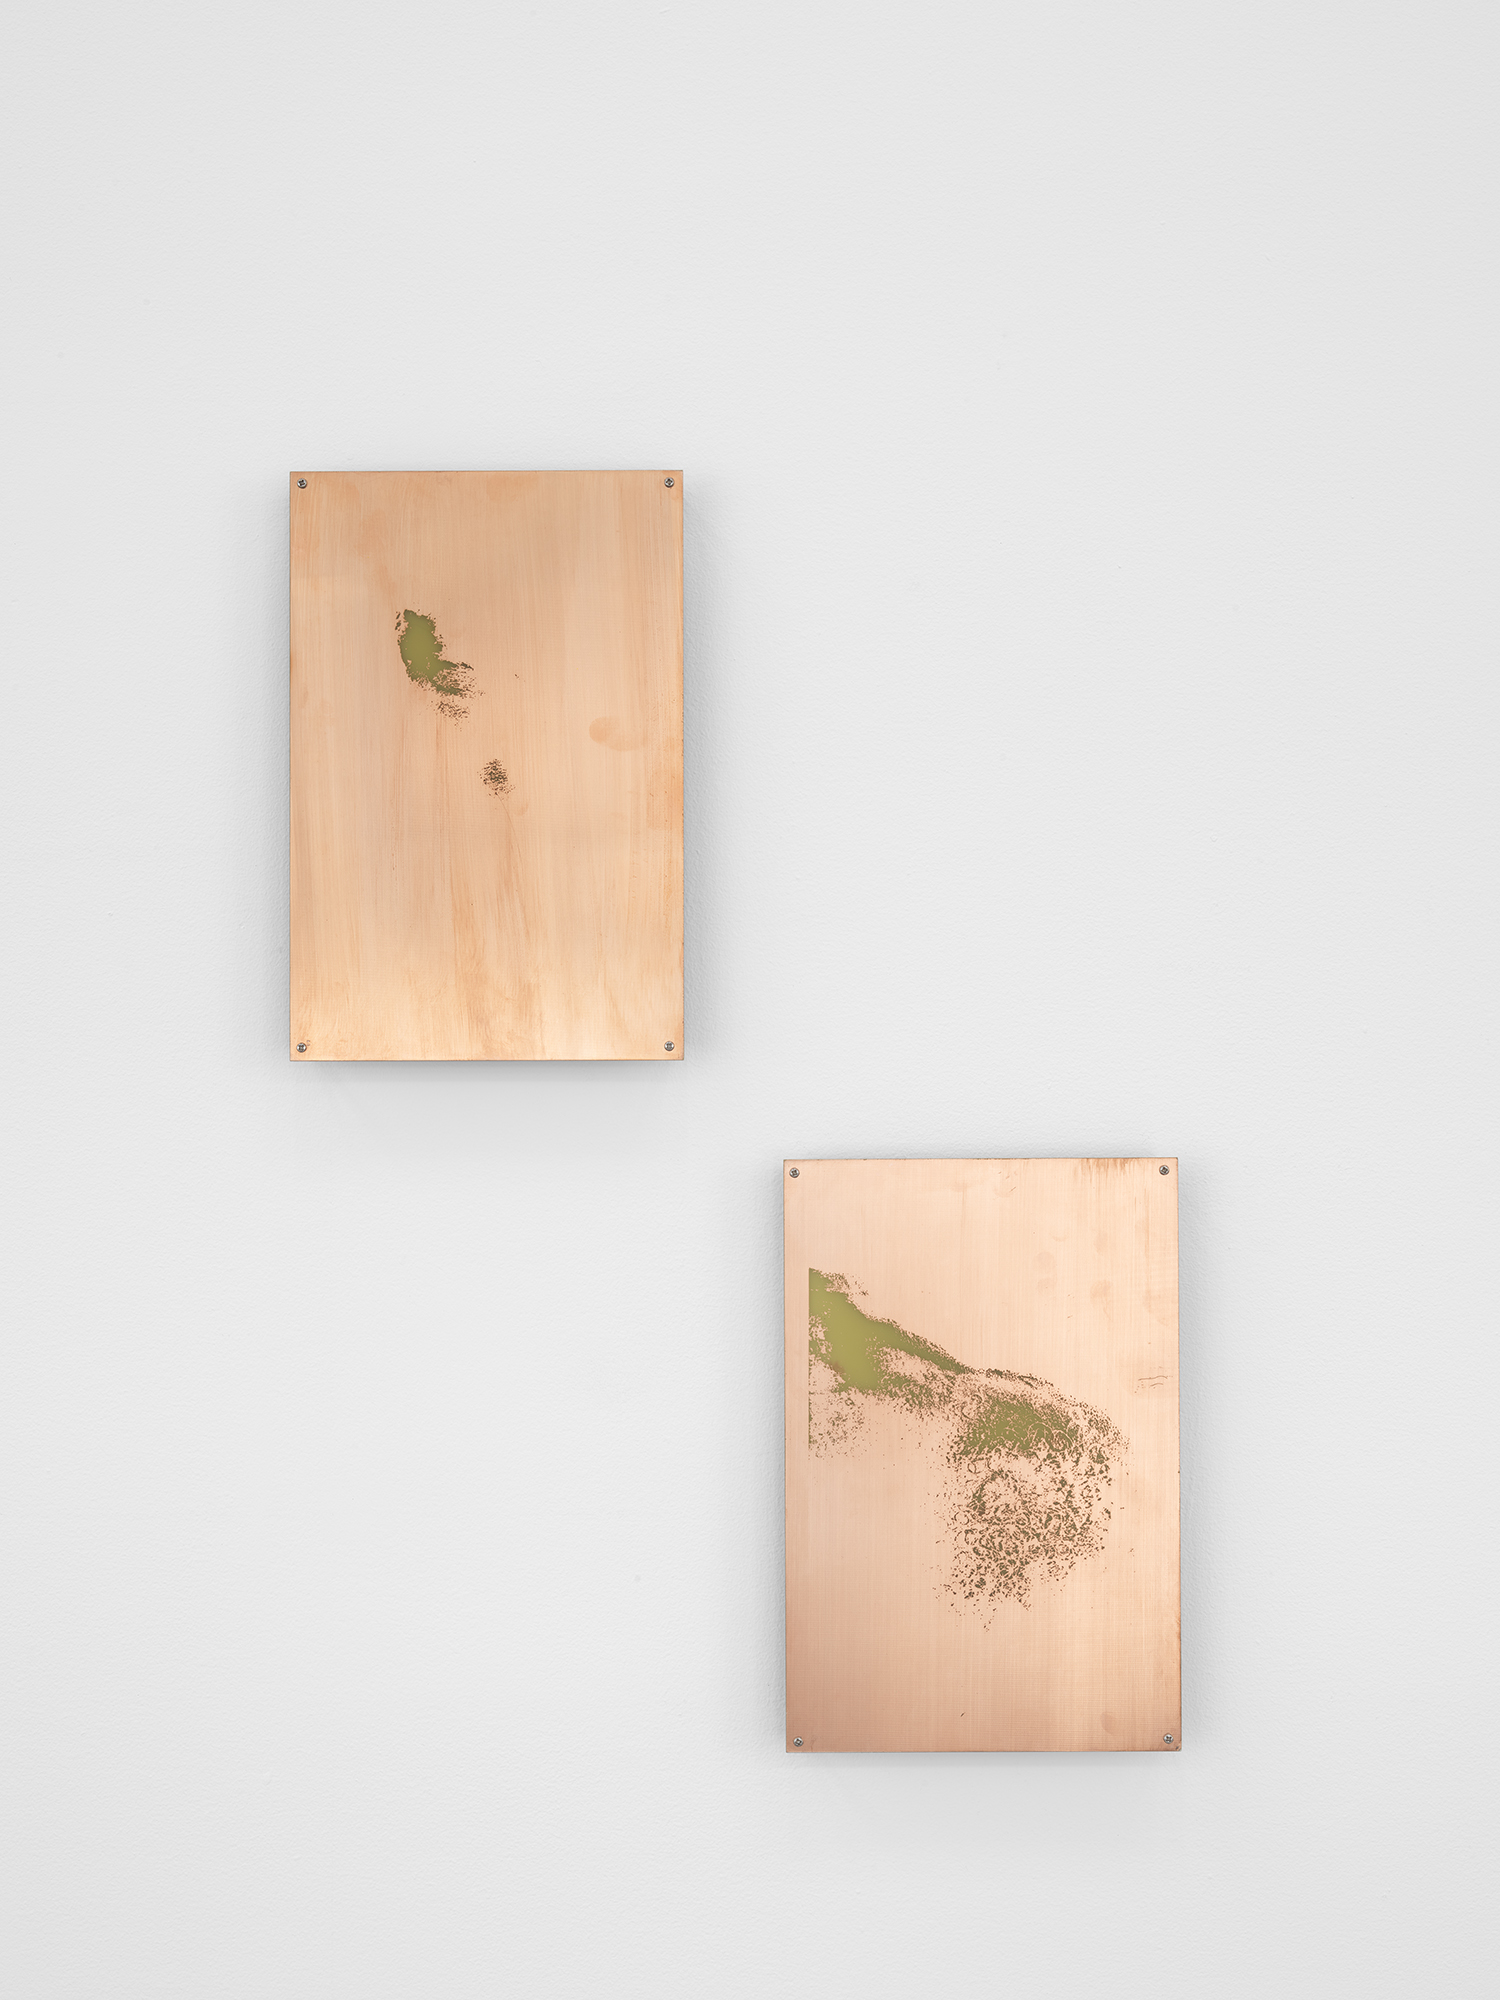   Body Print (Laryngeal Prominence, Sternum and Attending Soft Tissues)   2017  Etched copper-clad FR-4 glass-reinforced epoxy laminate board  12 x 8 inches each, 2 parts   Body Prints, 2017–   Exhibition:  Open Source, 2017   &nbsp; 